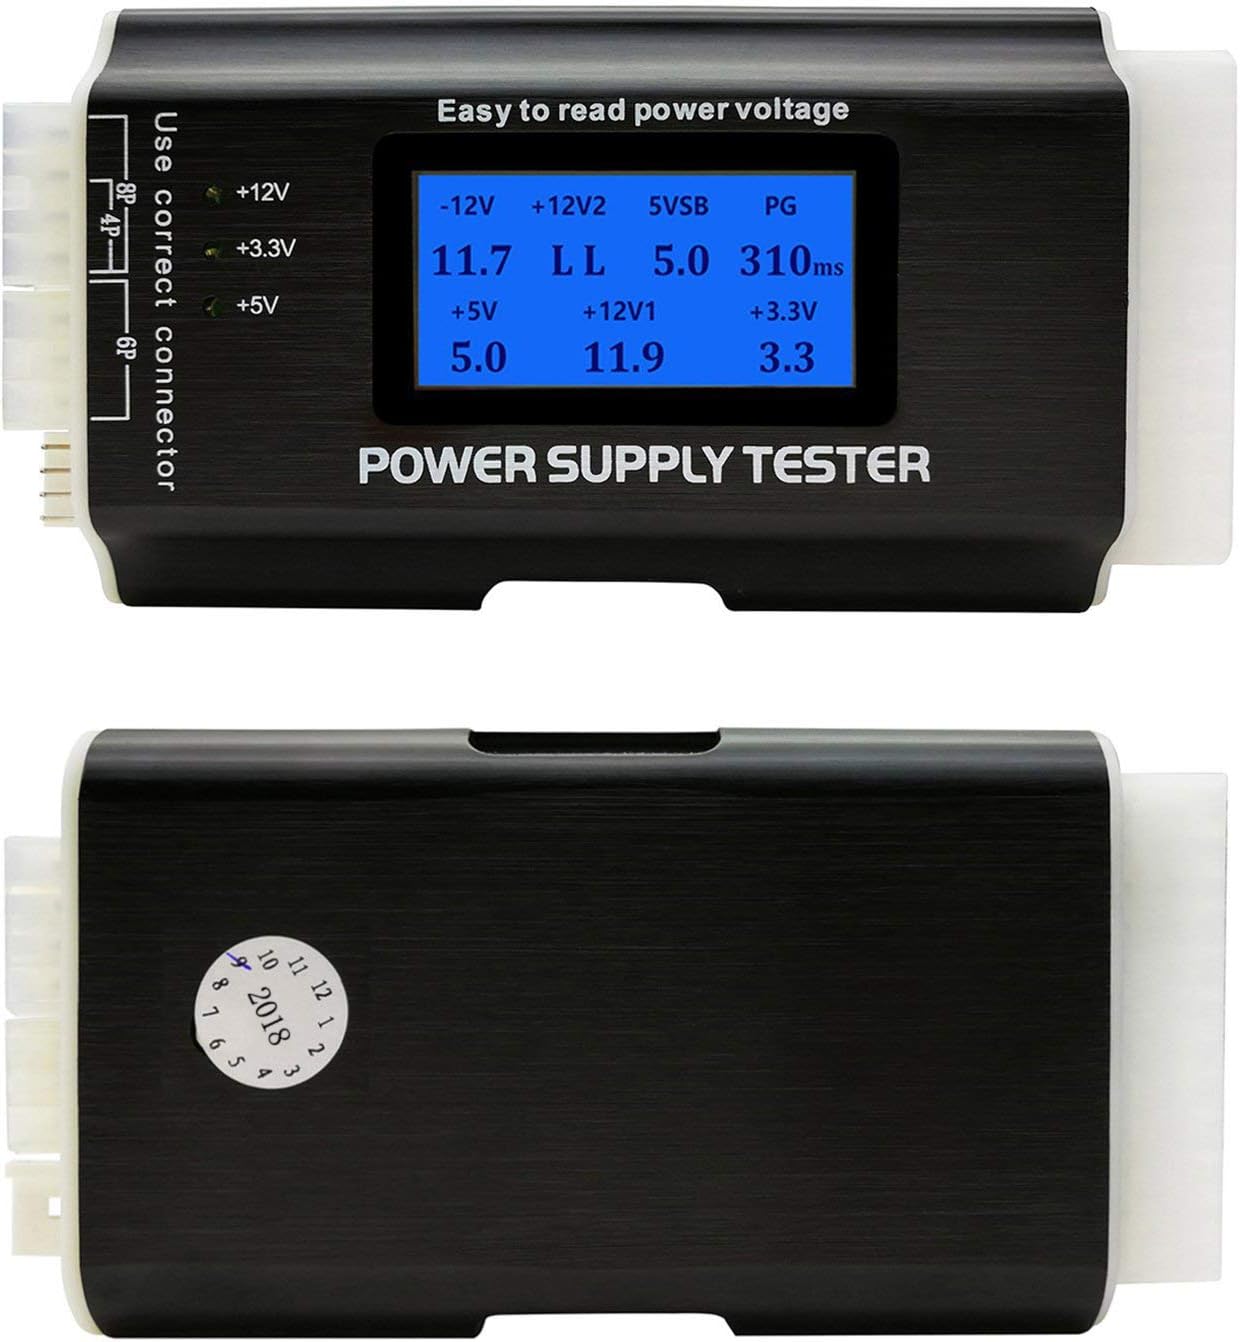 Computer PC Power Supply Tester, ATX/ITX/IDE/HDD/SATA/BYI Connectors Power Supply Tester, 1.8'' LCD Screen (Aluminum Alloy Enclosure) - image 1 of 7